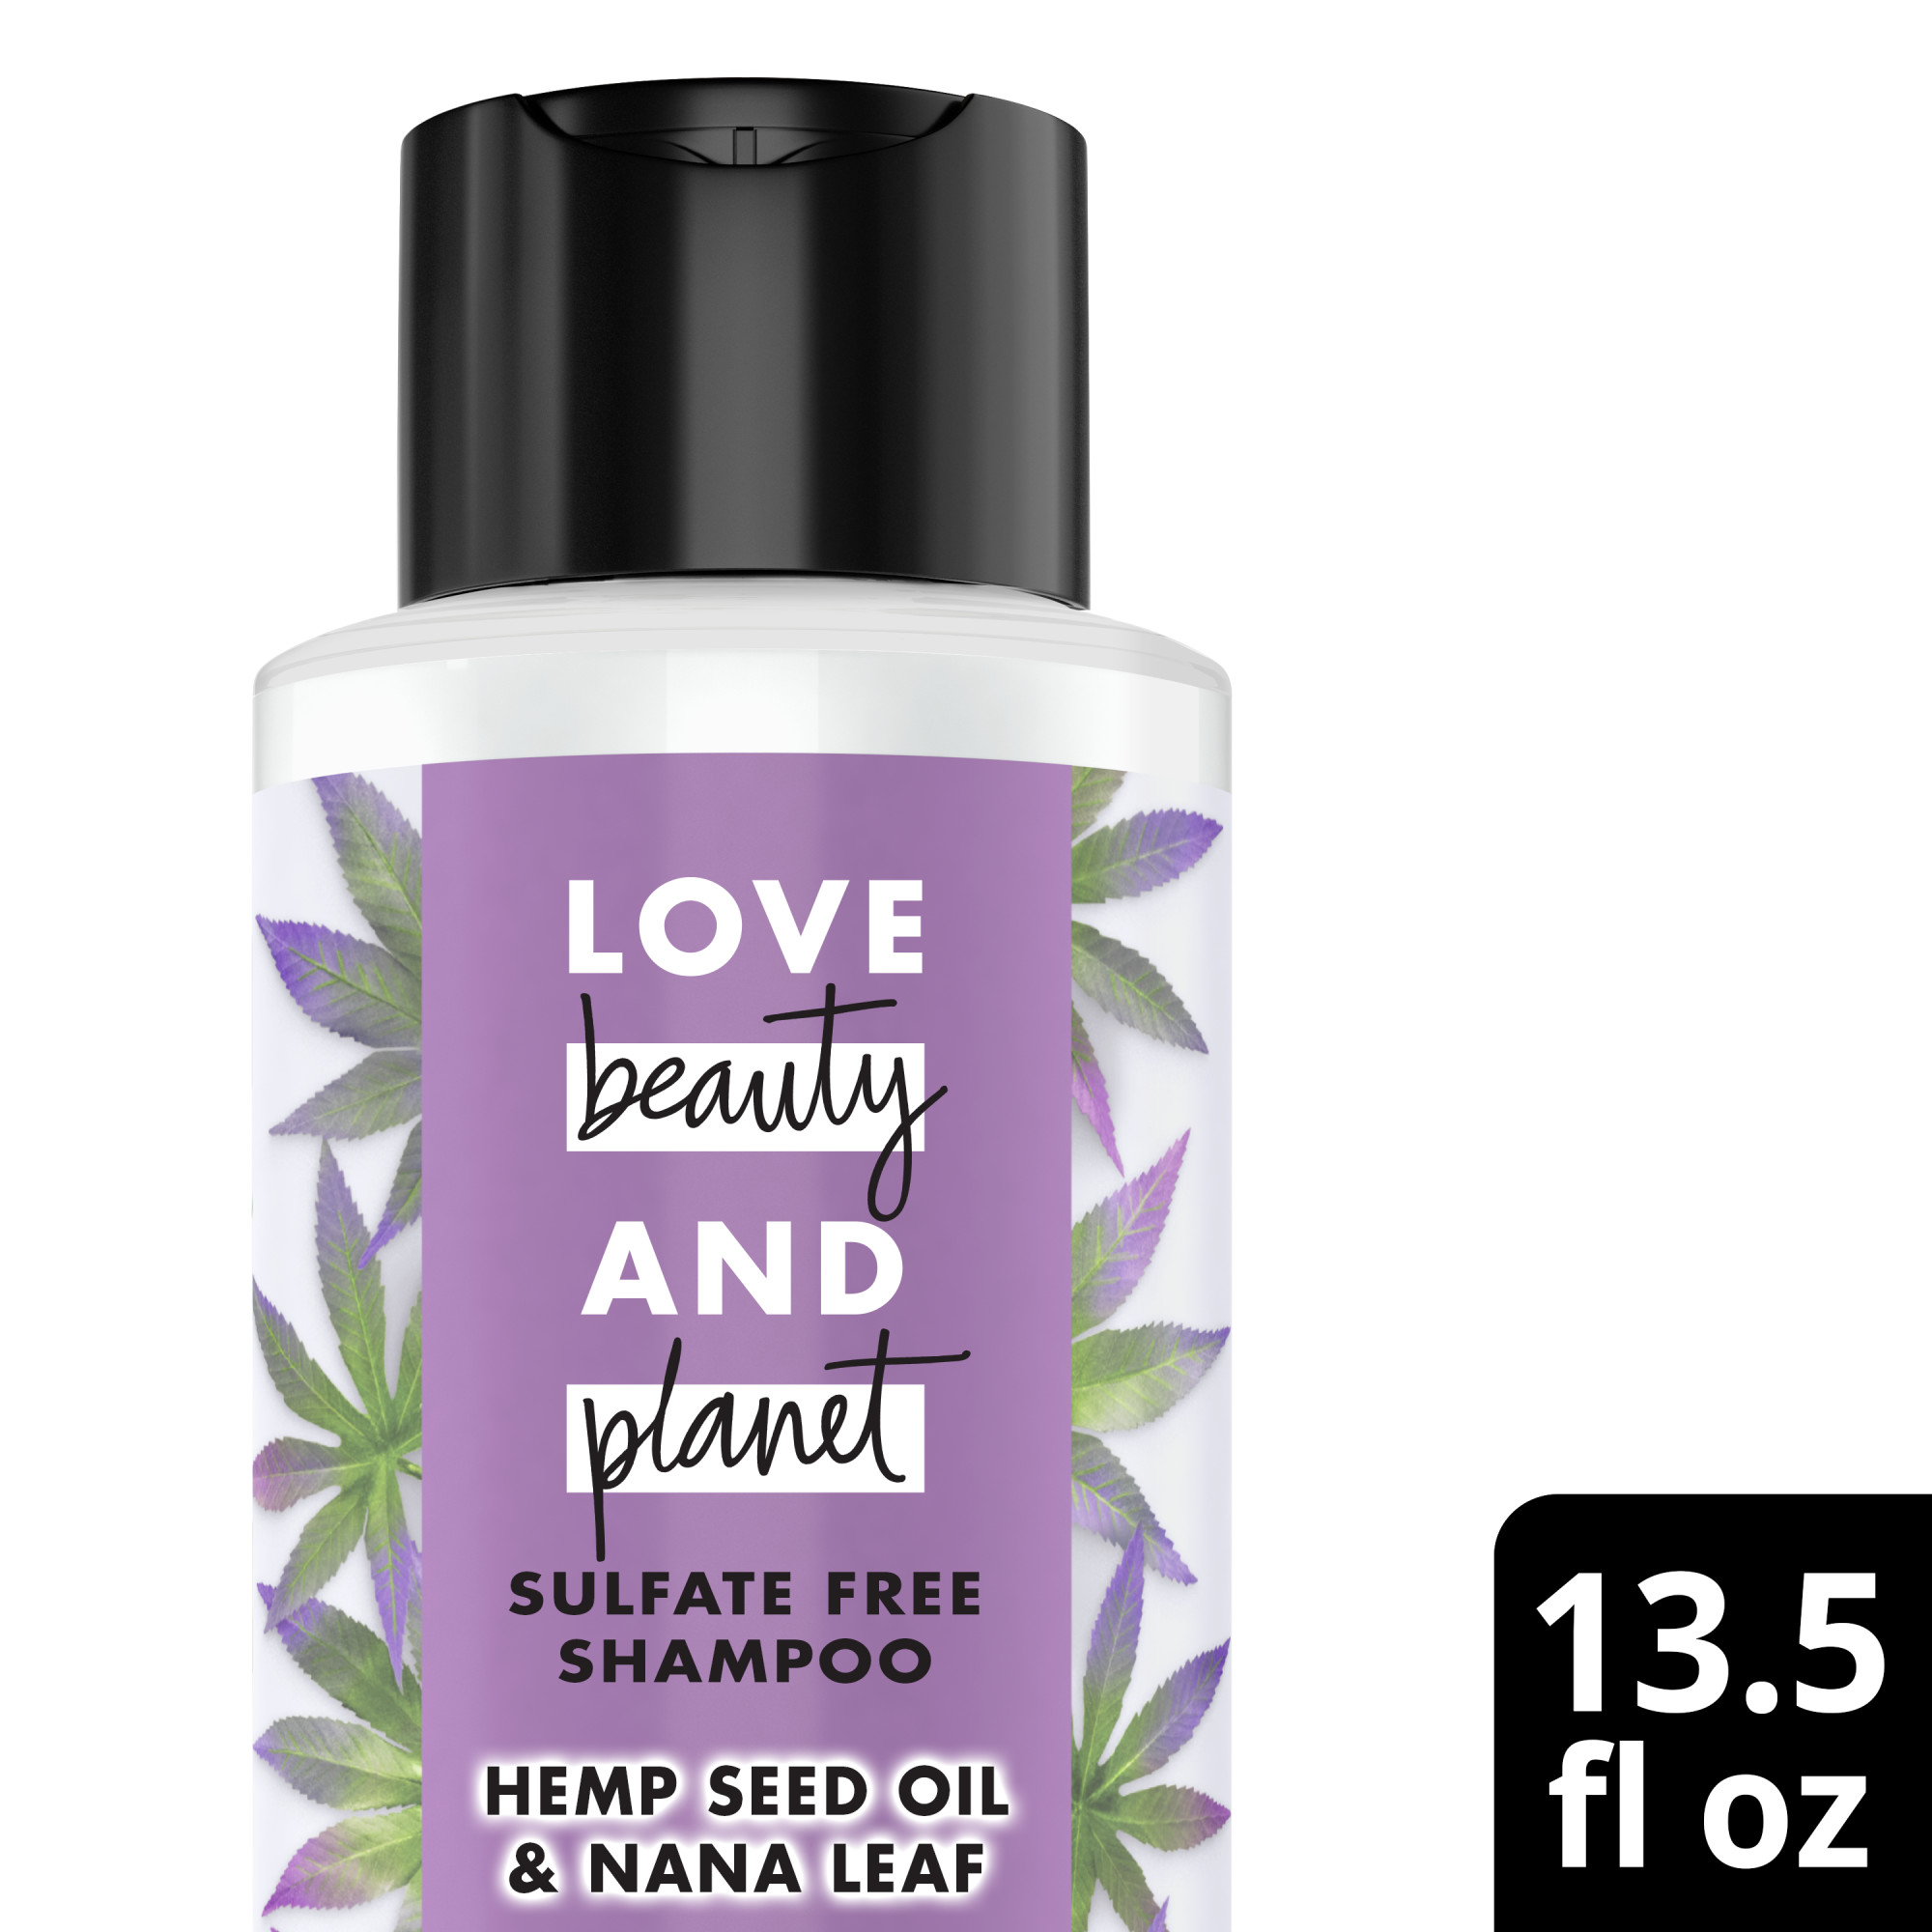 Love Beauty and Planet Soothe & Nourish Sulphate Free Shampoo 13.5 fl oz - image 1 of 7